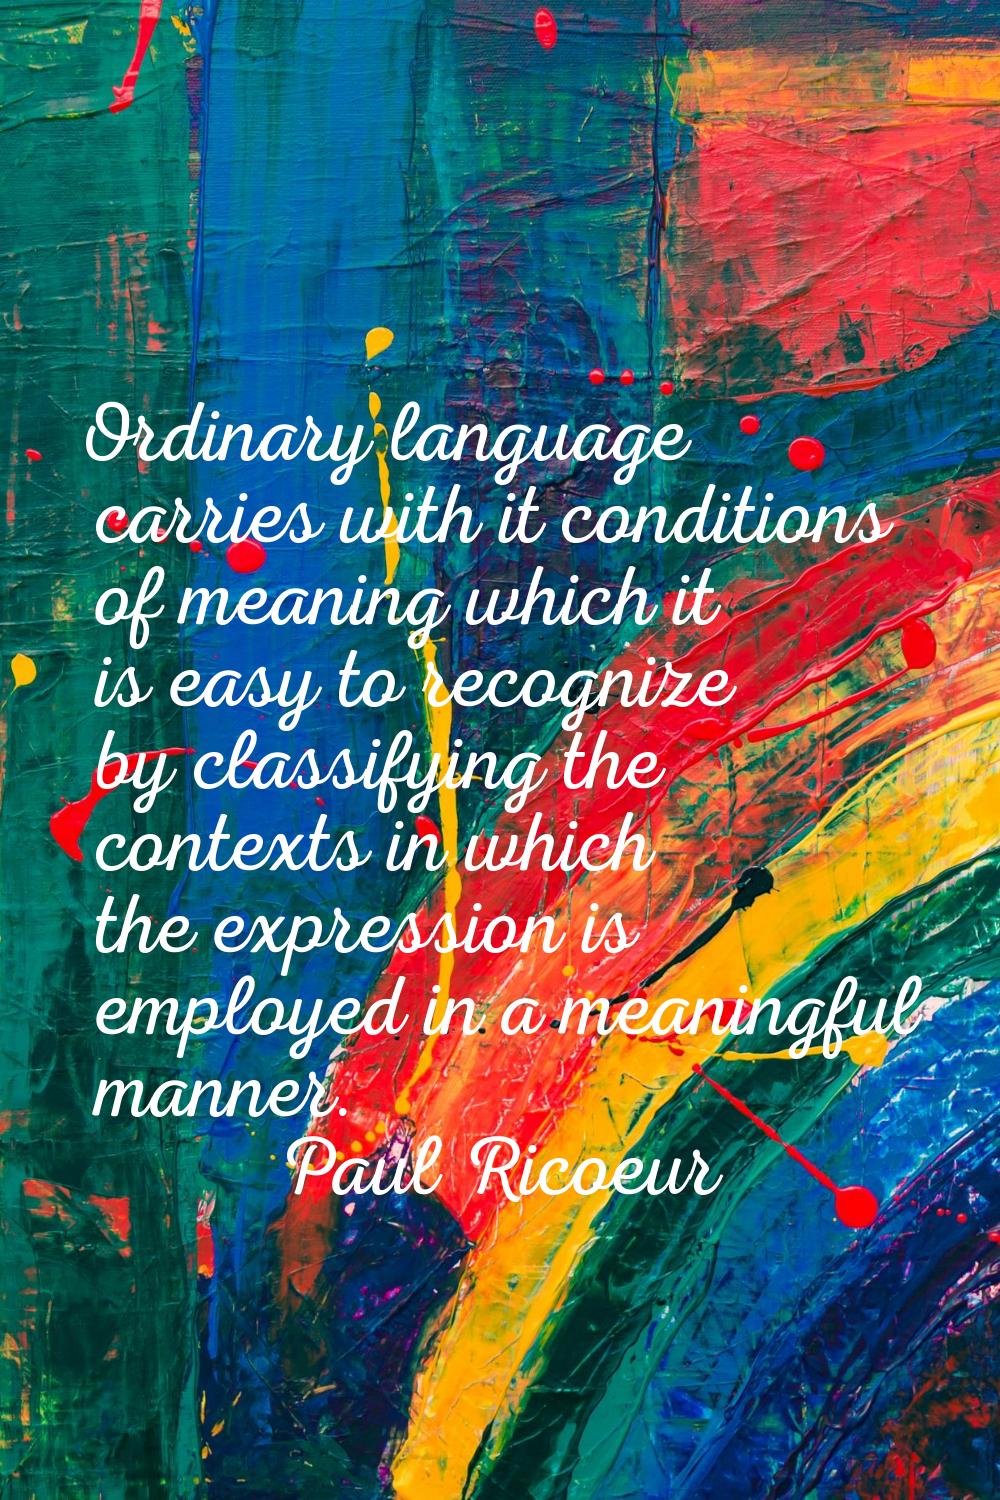 Ordinary language carries with it conditions of meaning which it is easy to recognize by classifyin